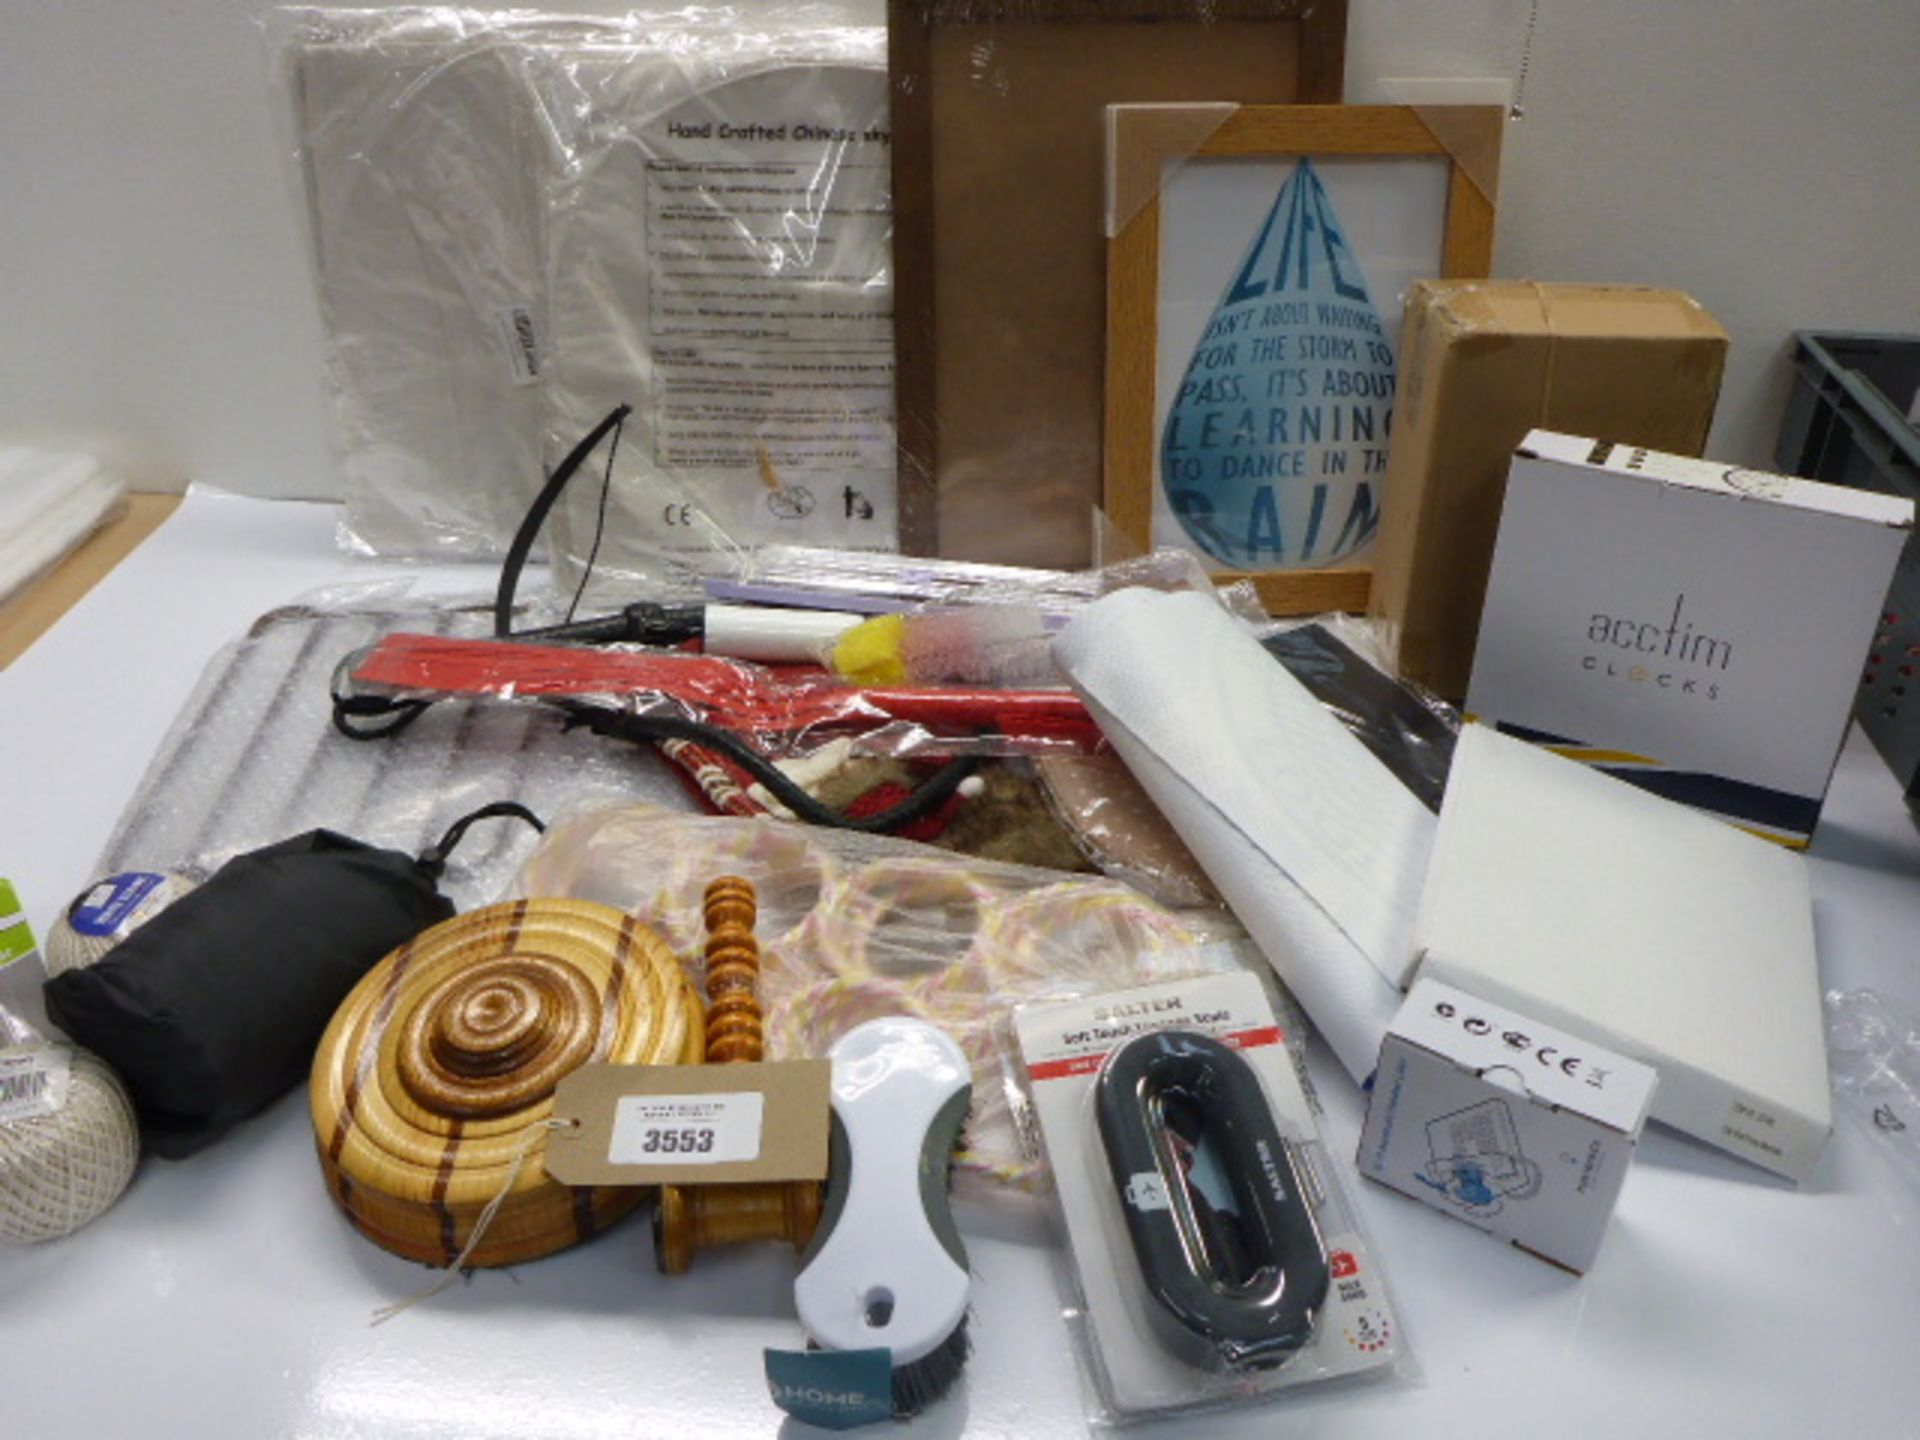 Chinese sky lanterns, picture frames, auctioneer gavel, mains adapter, luggage scale and household